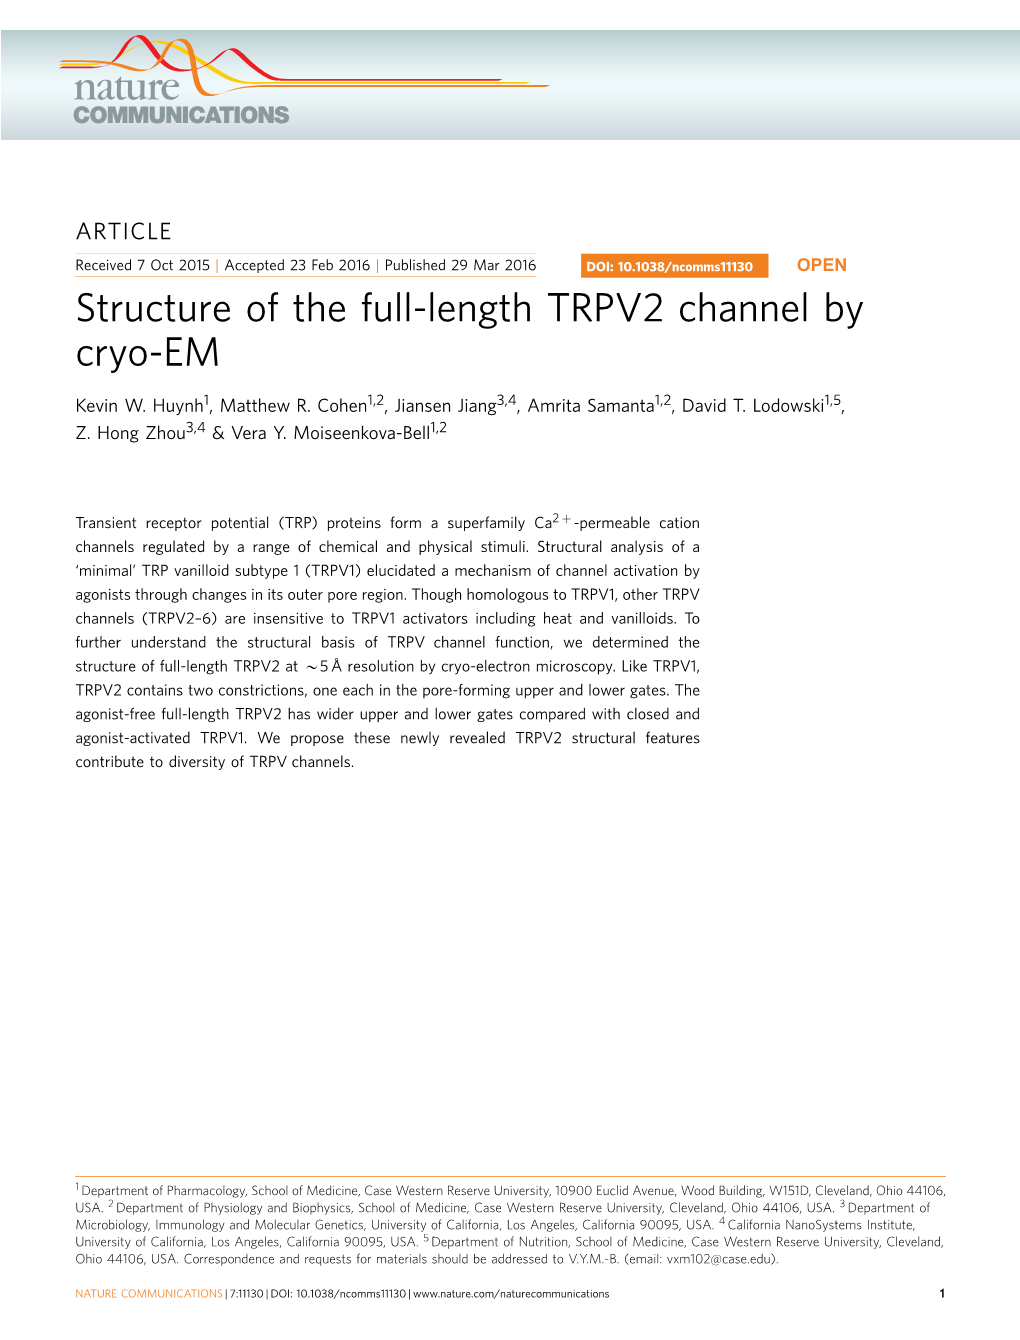 Structure of the Full-Length TRPV2 Channel by Cryo-EM